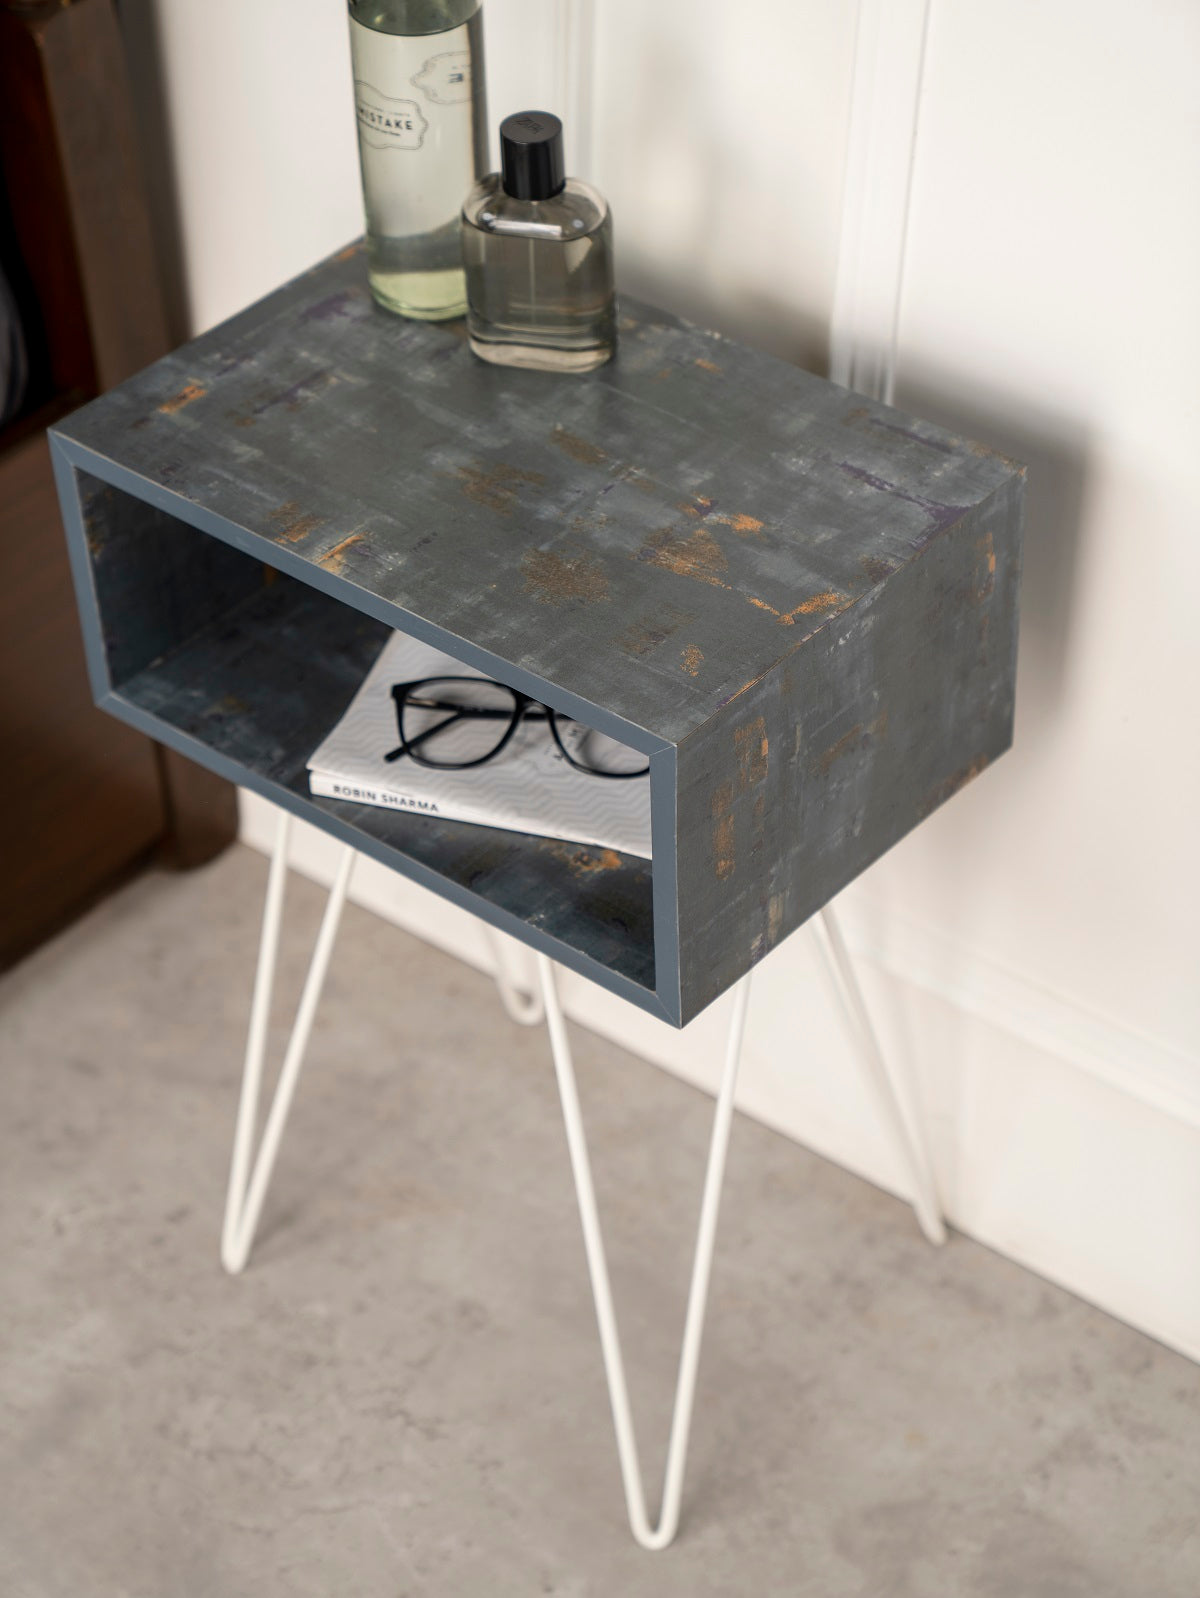 Bohemian Tint Amalgam Side Tables, Wooden Tables, Bedside Tables, End Tables, Living Room Decor by A Tiny Mistake